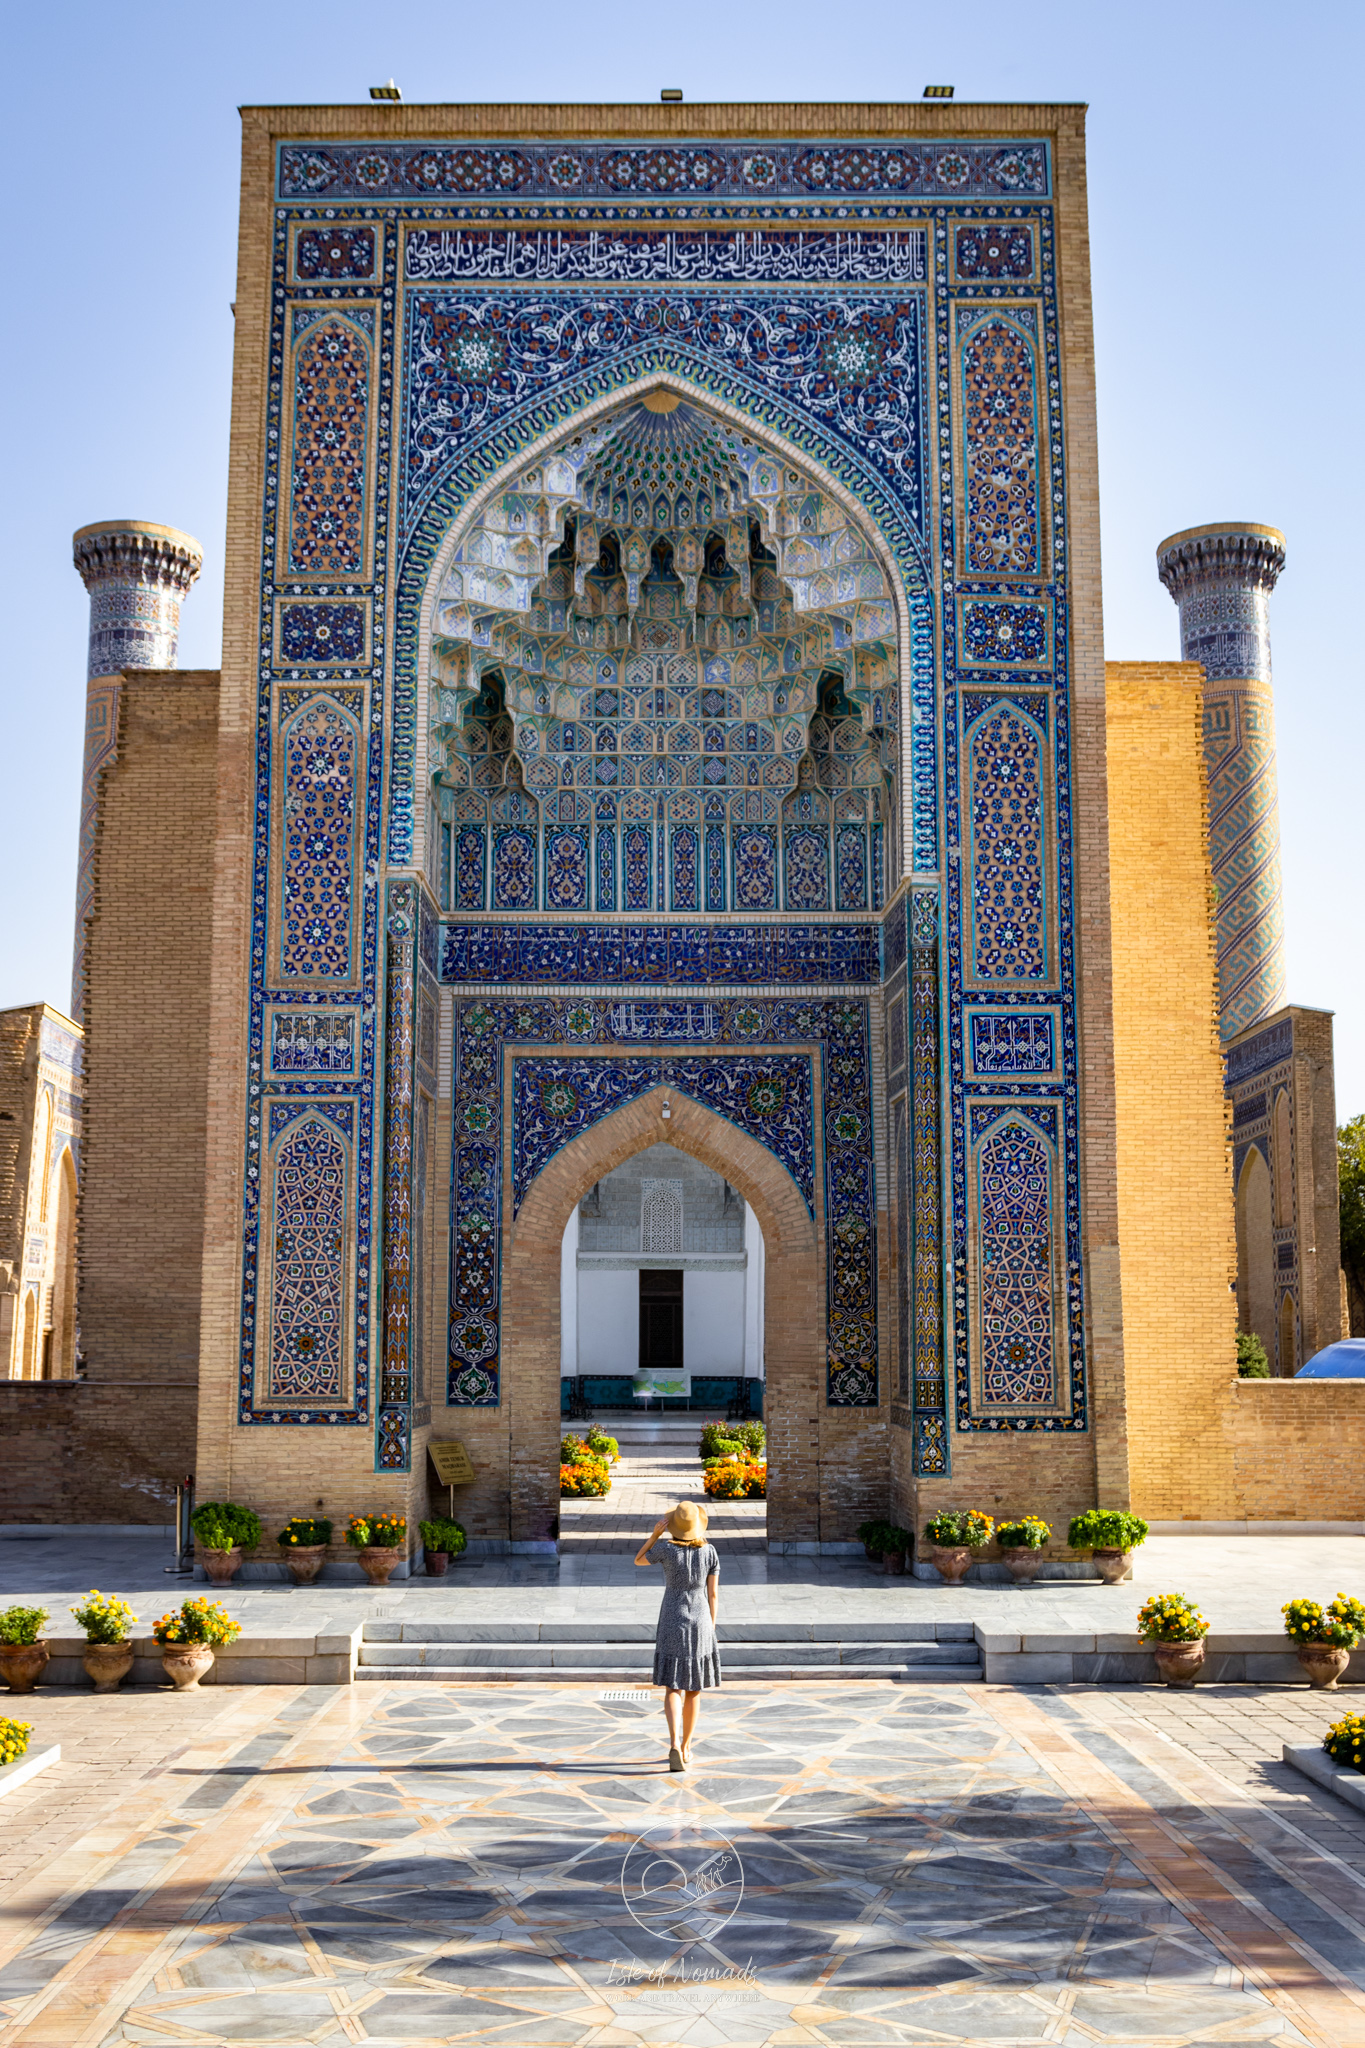 Much of the main sights in Samarkand are located in the city centre...